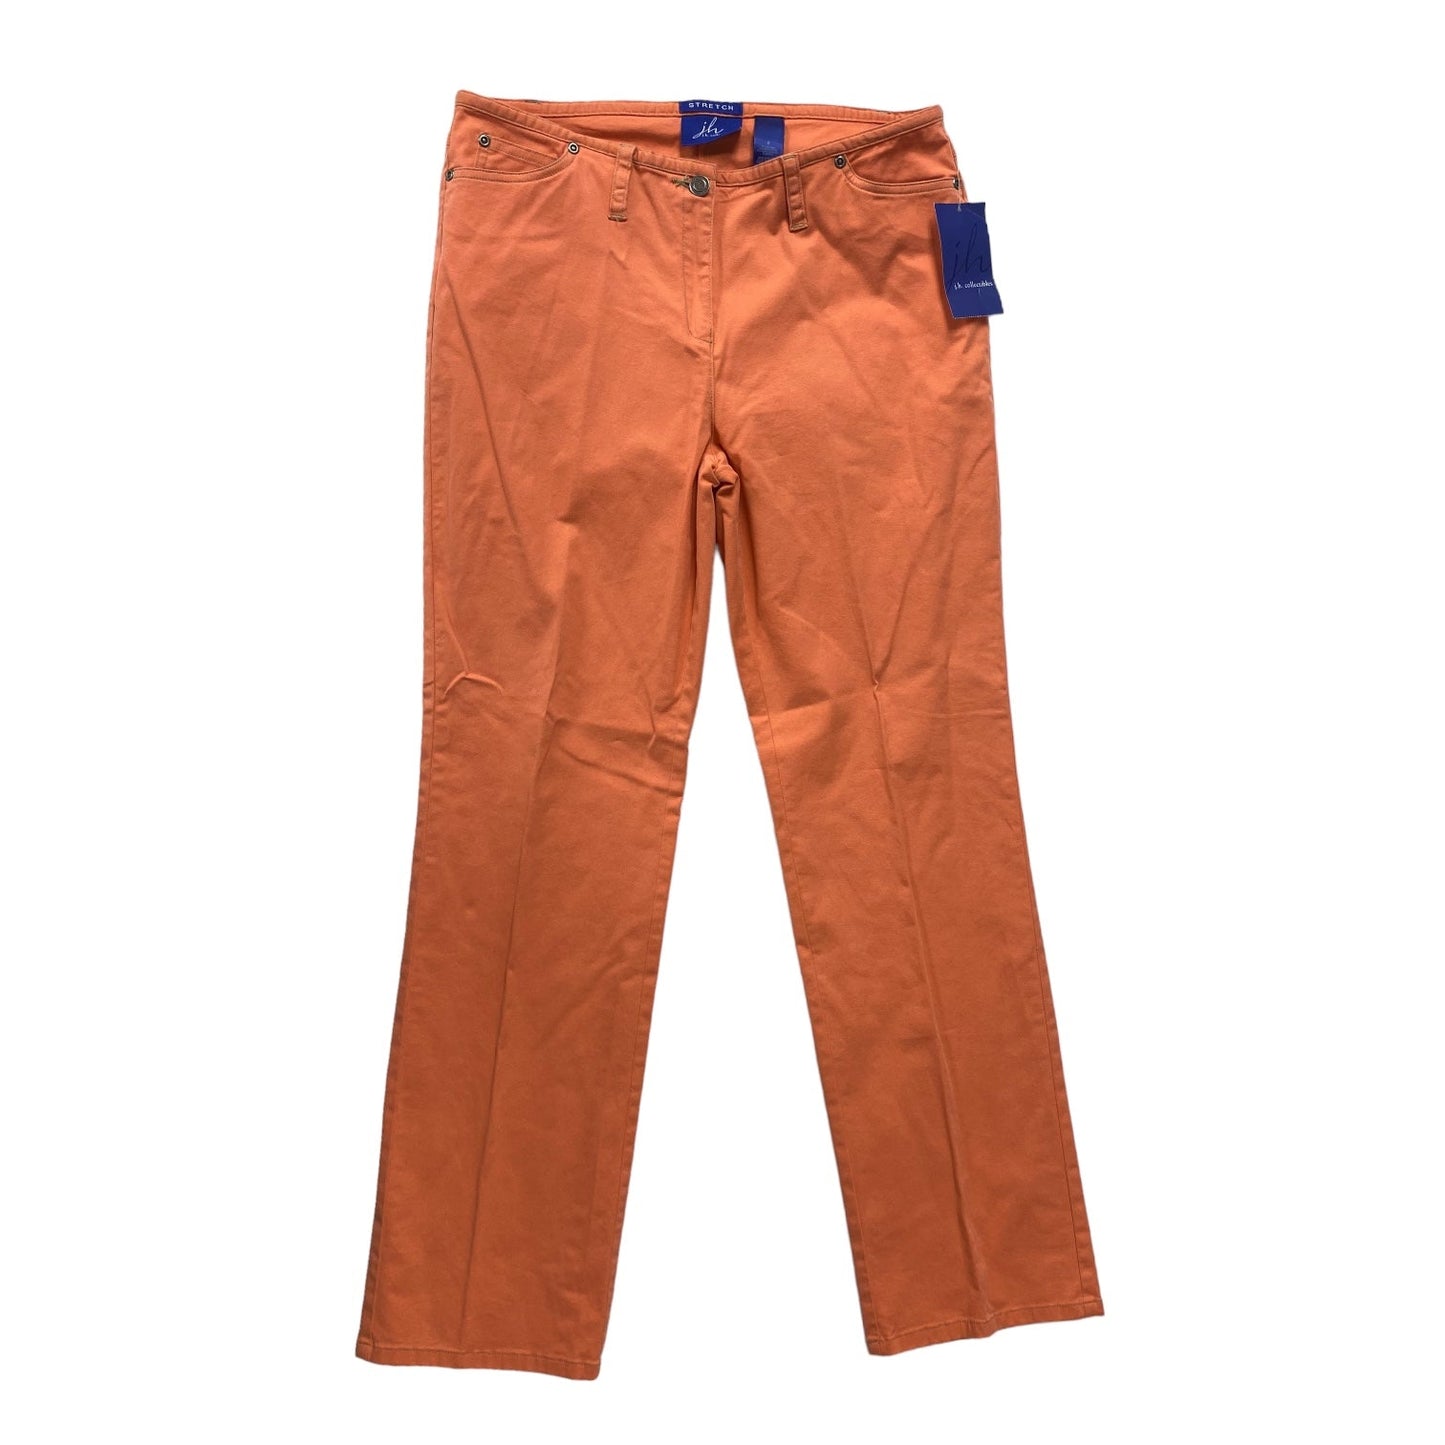 Orange Pants Other JH COLLECTIBLES, Size 8